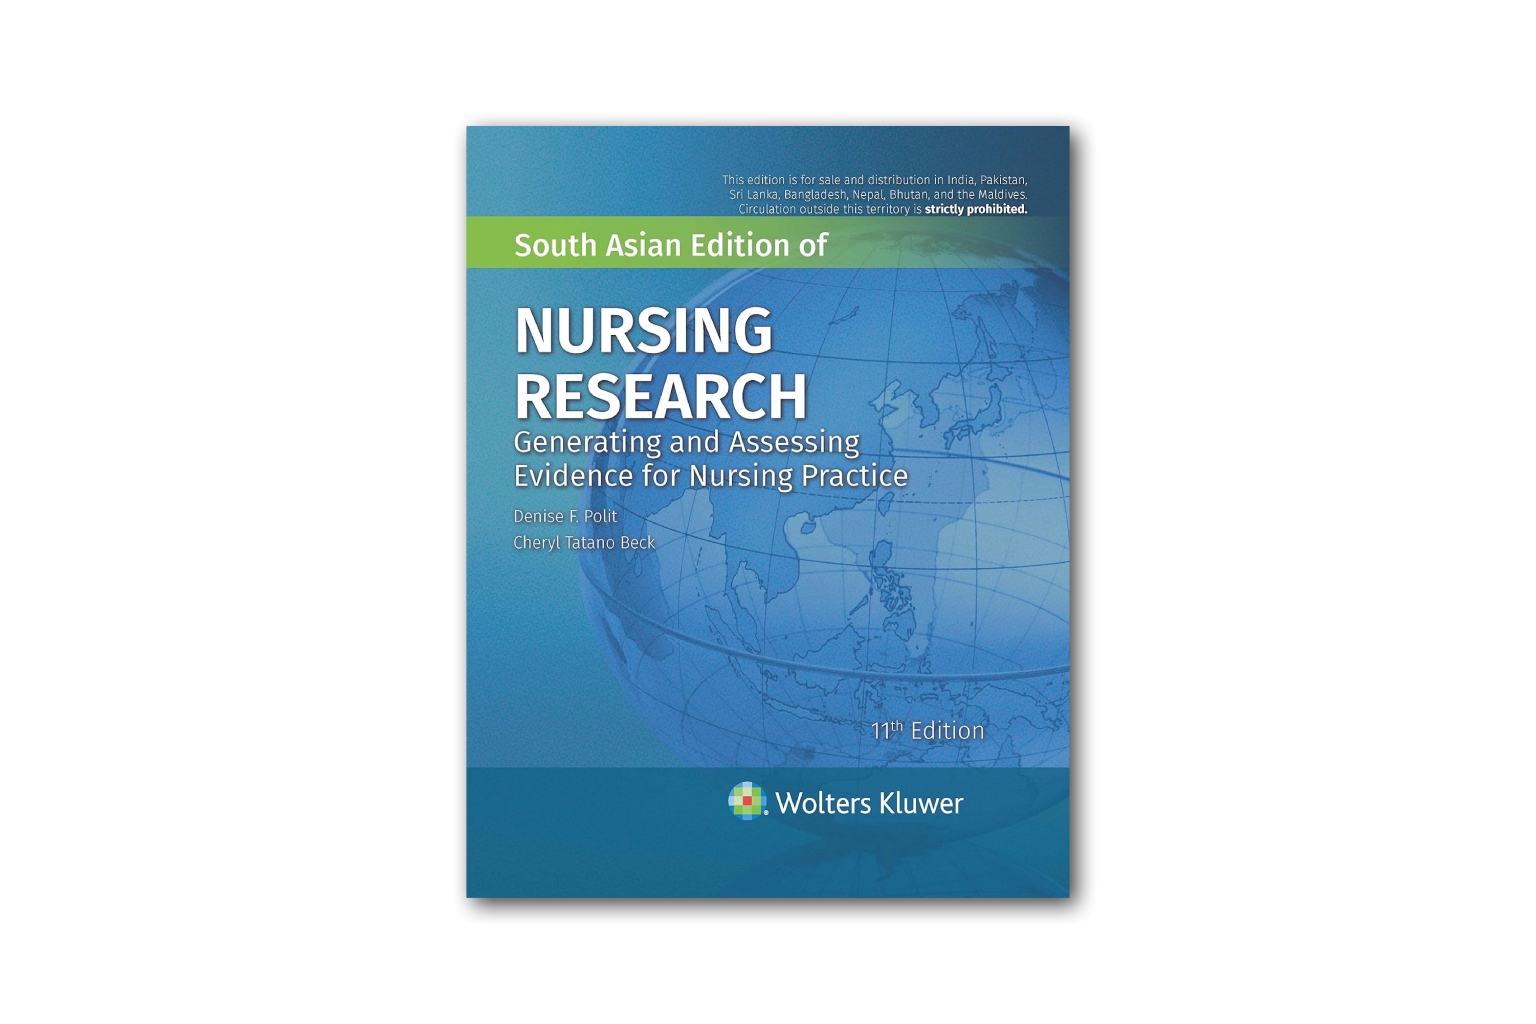 South Asian Edition of Nursing Research 11 Edition eContent cover.